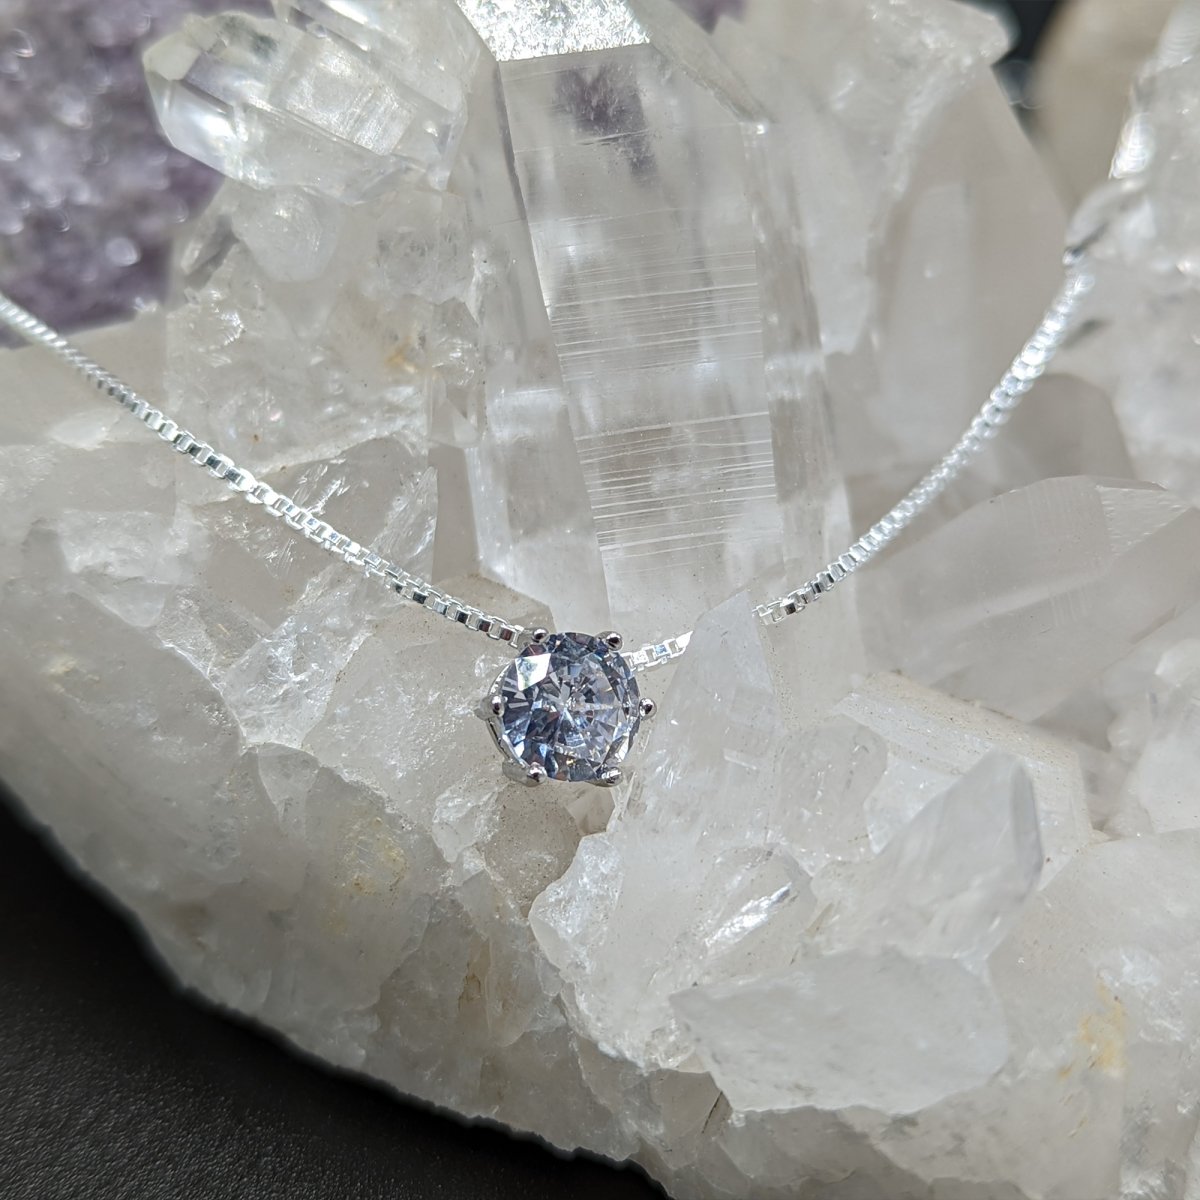 Warrior Gift, Survivor, Awareness Necklace, Dainty Silver CZ Necklace - Meaningful Cards